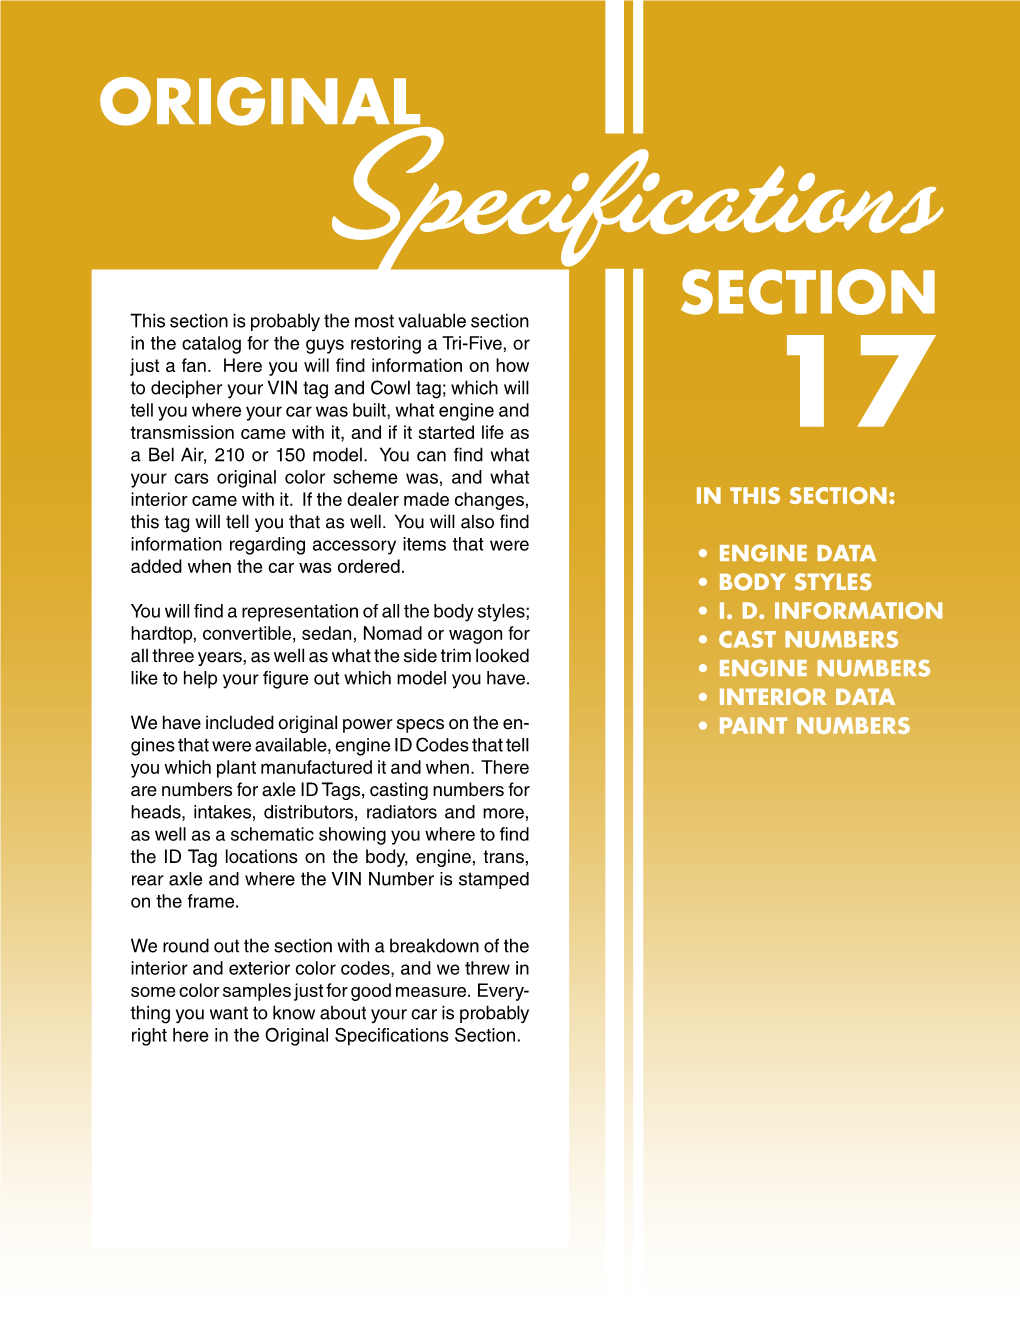 ORIGINAL Specifications This Section Is Probably the Most Valuable Section SECTION in the Catalog for the Guys Restoring a Tri-Five, Or Just a Fan